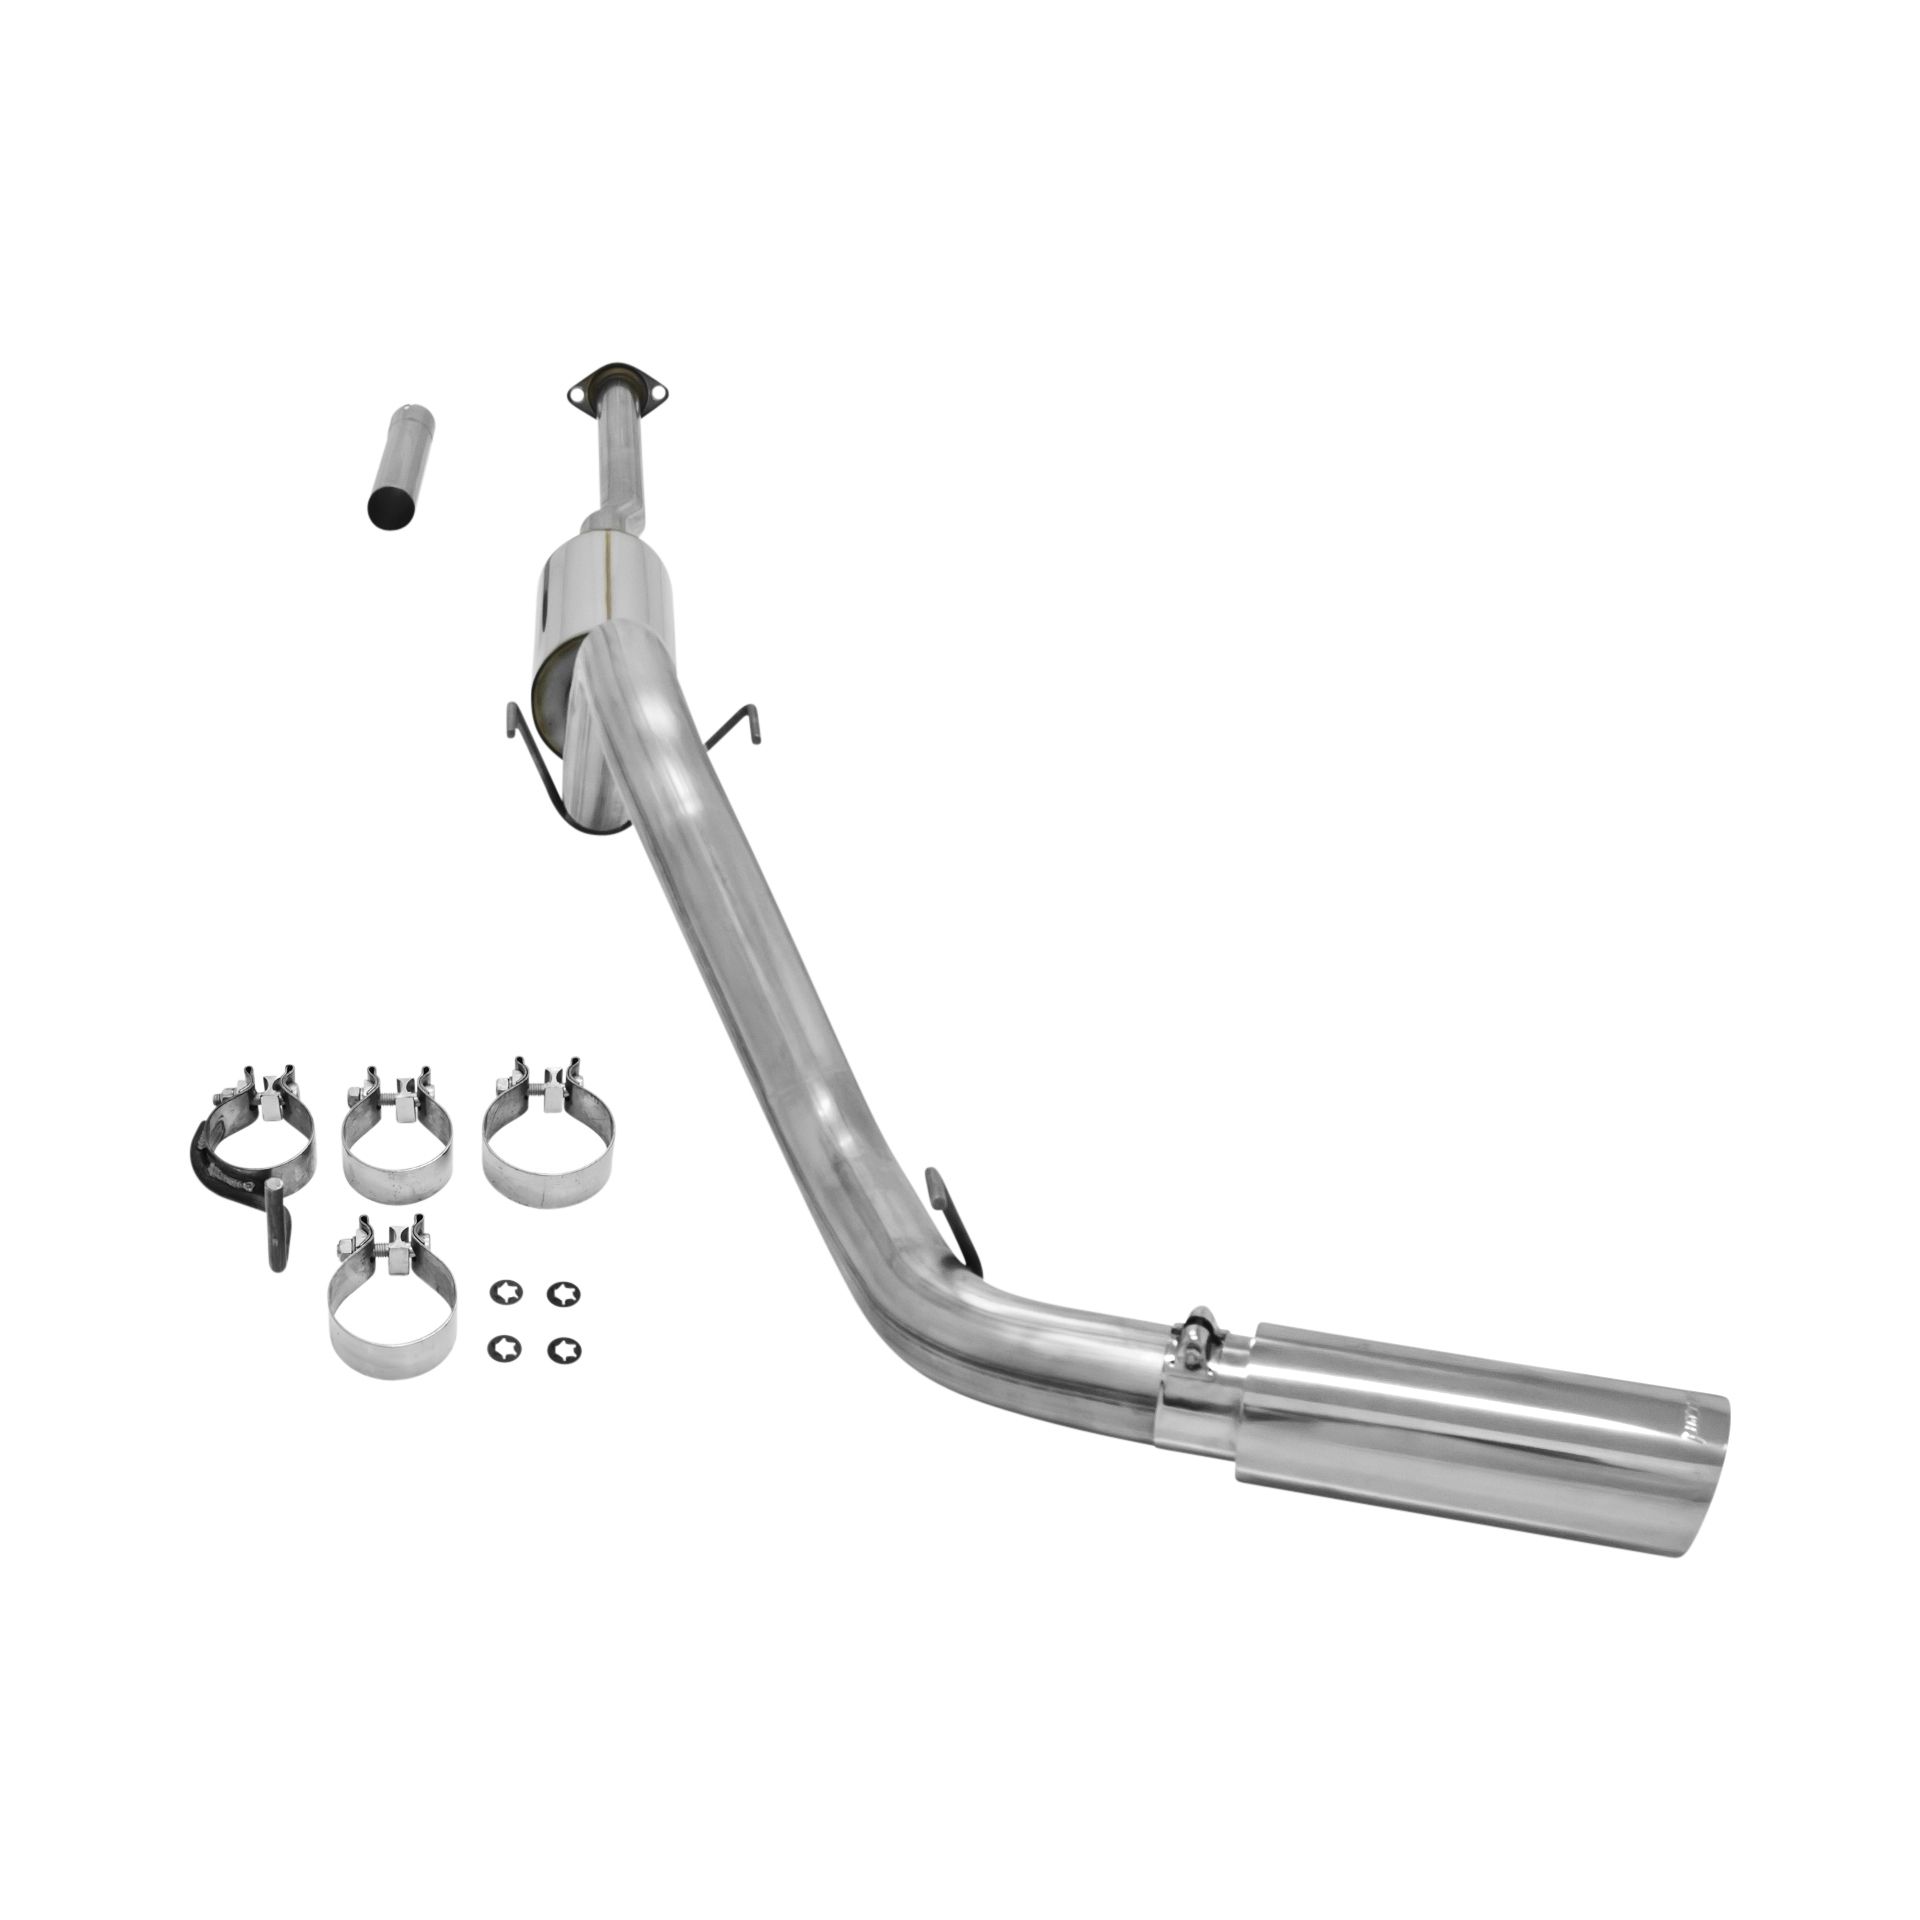 2015 Toyota Tacoma TRD Pro 4.0L Flowmaster dBX Cat-Back Exhaust